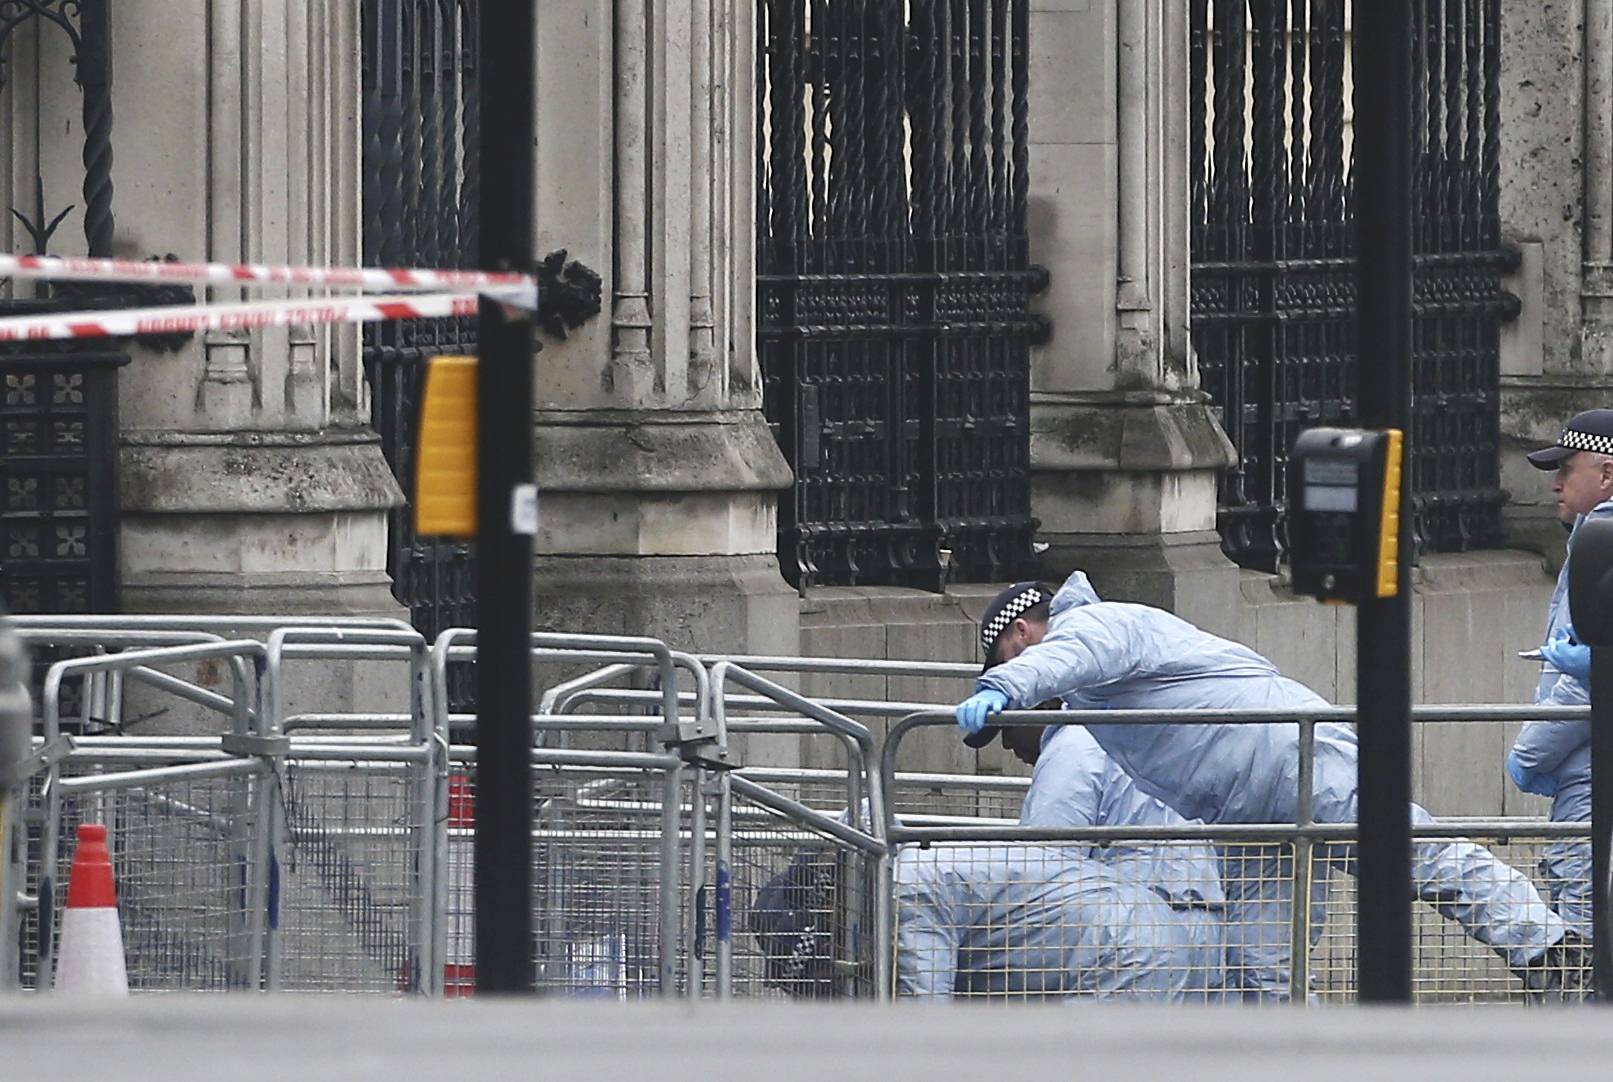 Police work at Carriage Gate outside the Houses of Parliament the morning after an attack by a man driving a car and weilding a knife left five people dead and dozens injured, in London